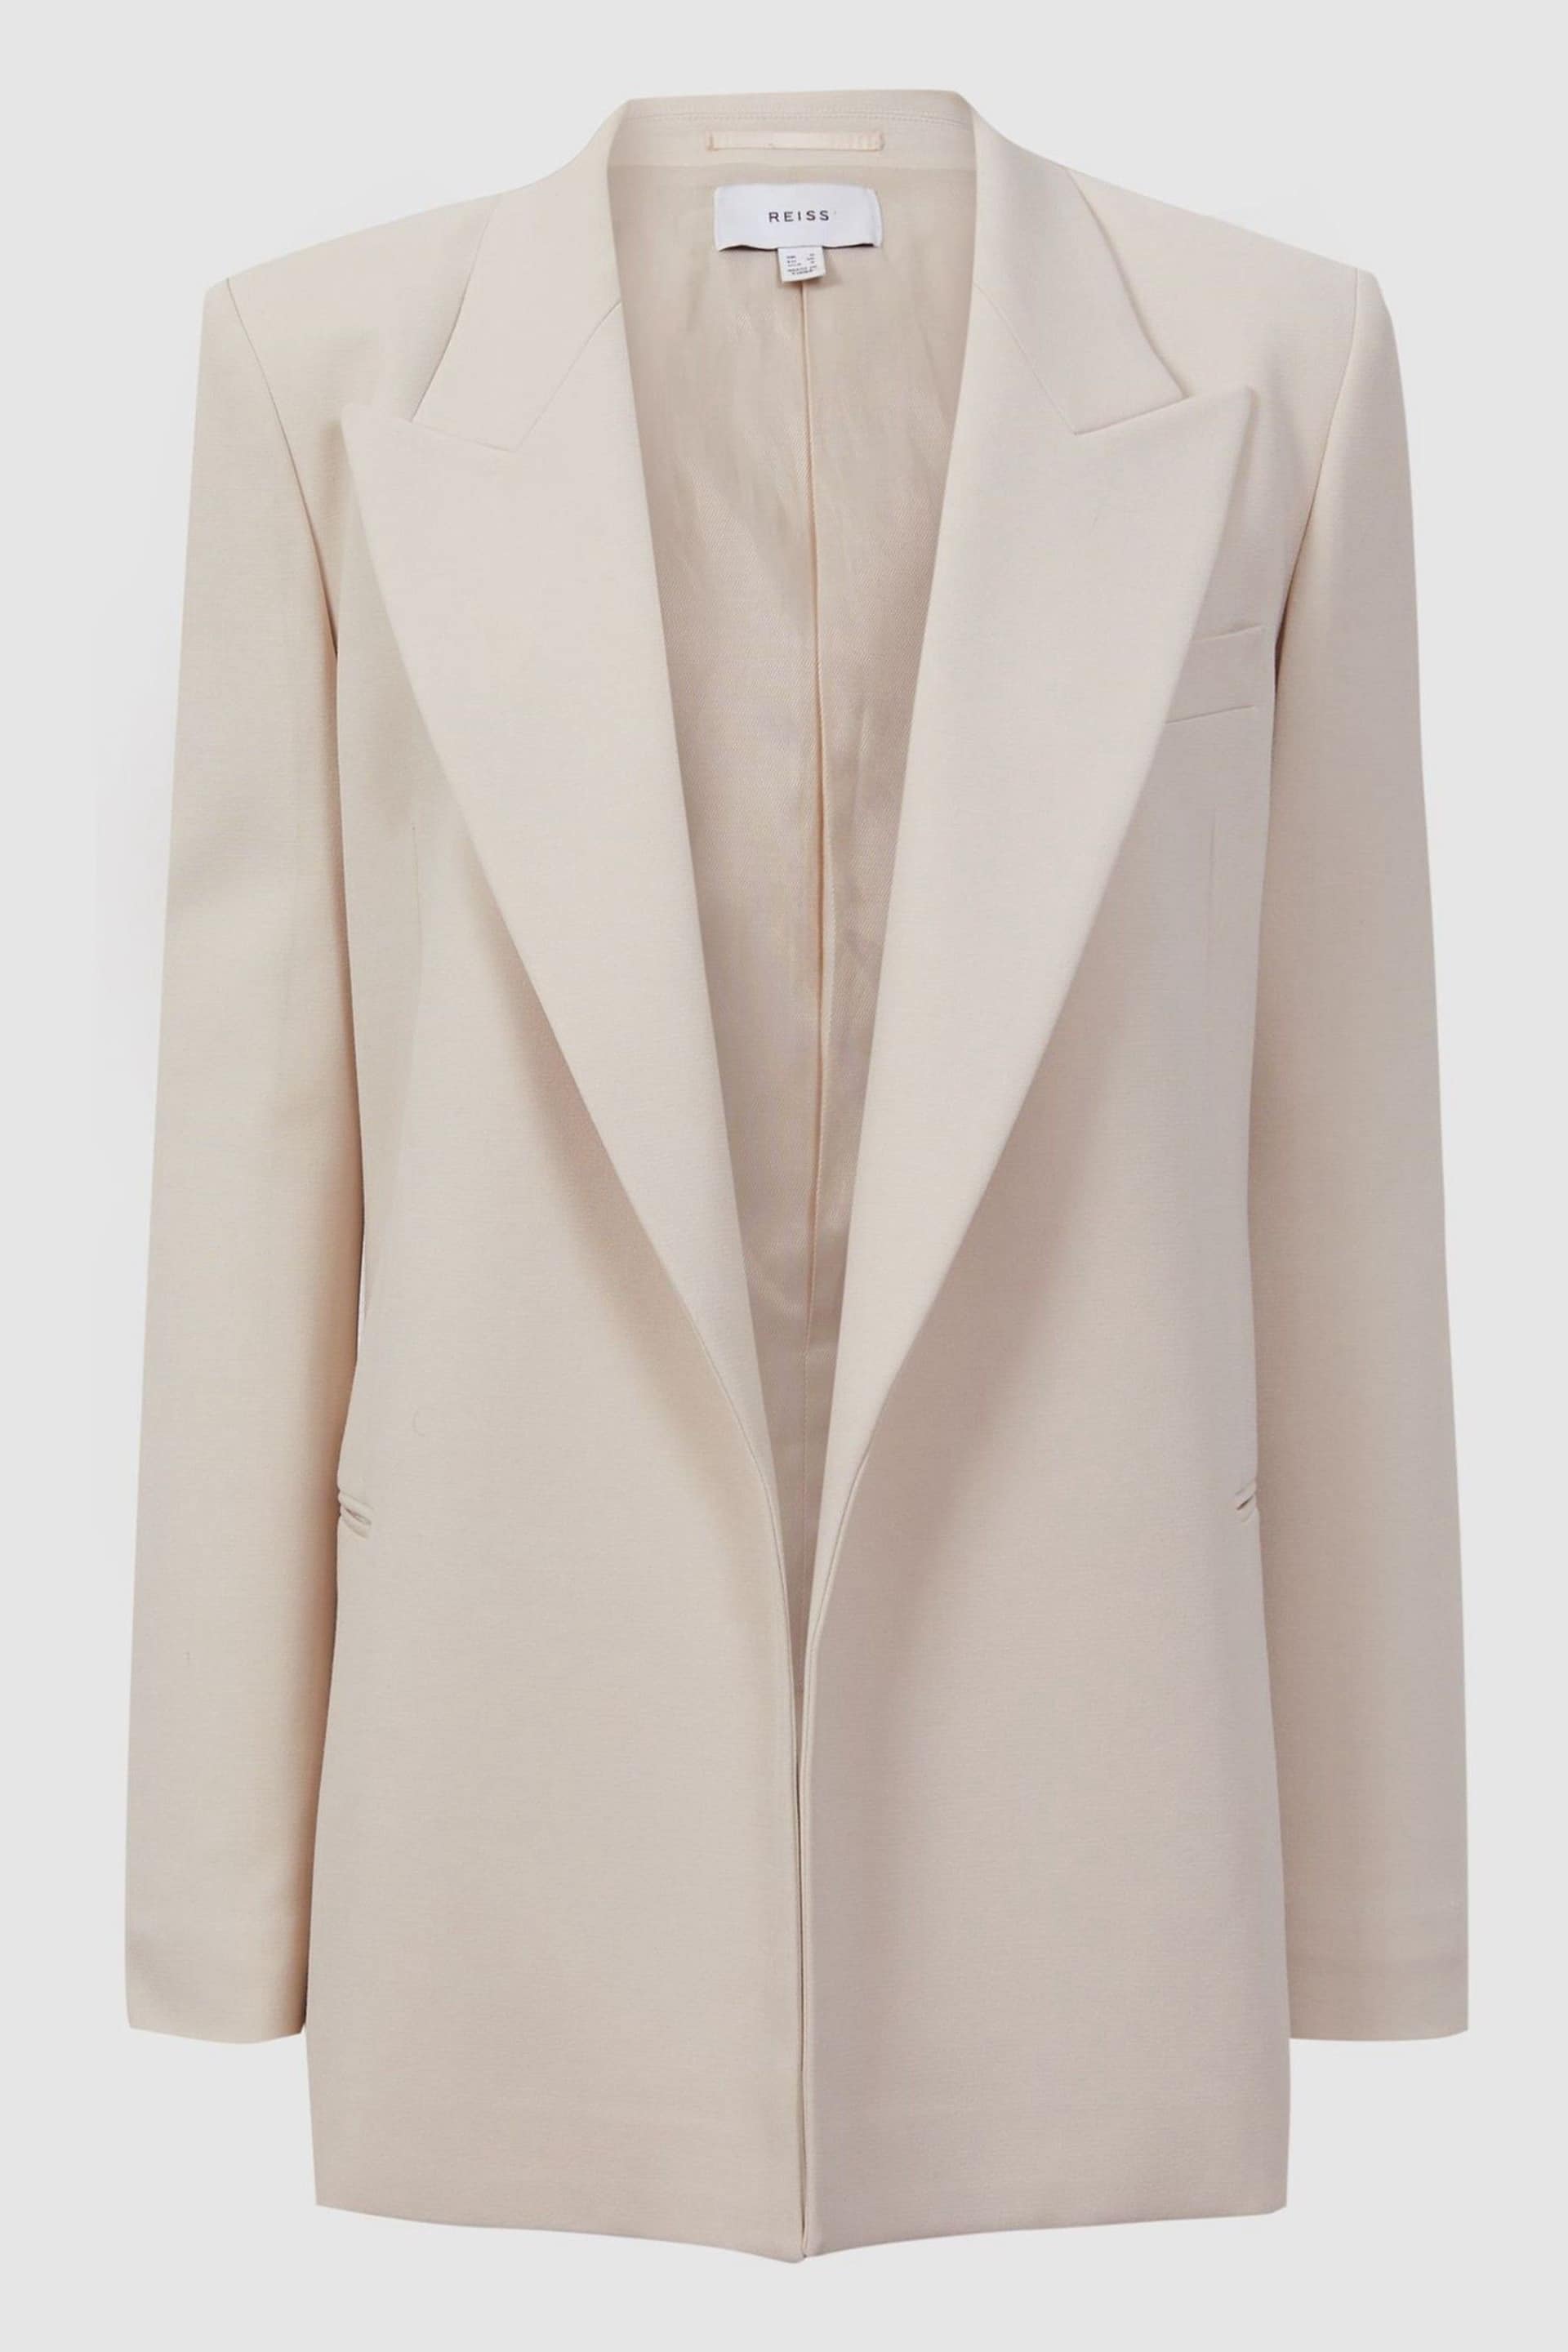 Reiss Neutral Maya Petite Tailored Fit Single Breasted Suit Blazer - Image 2 of 6